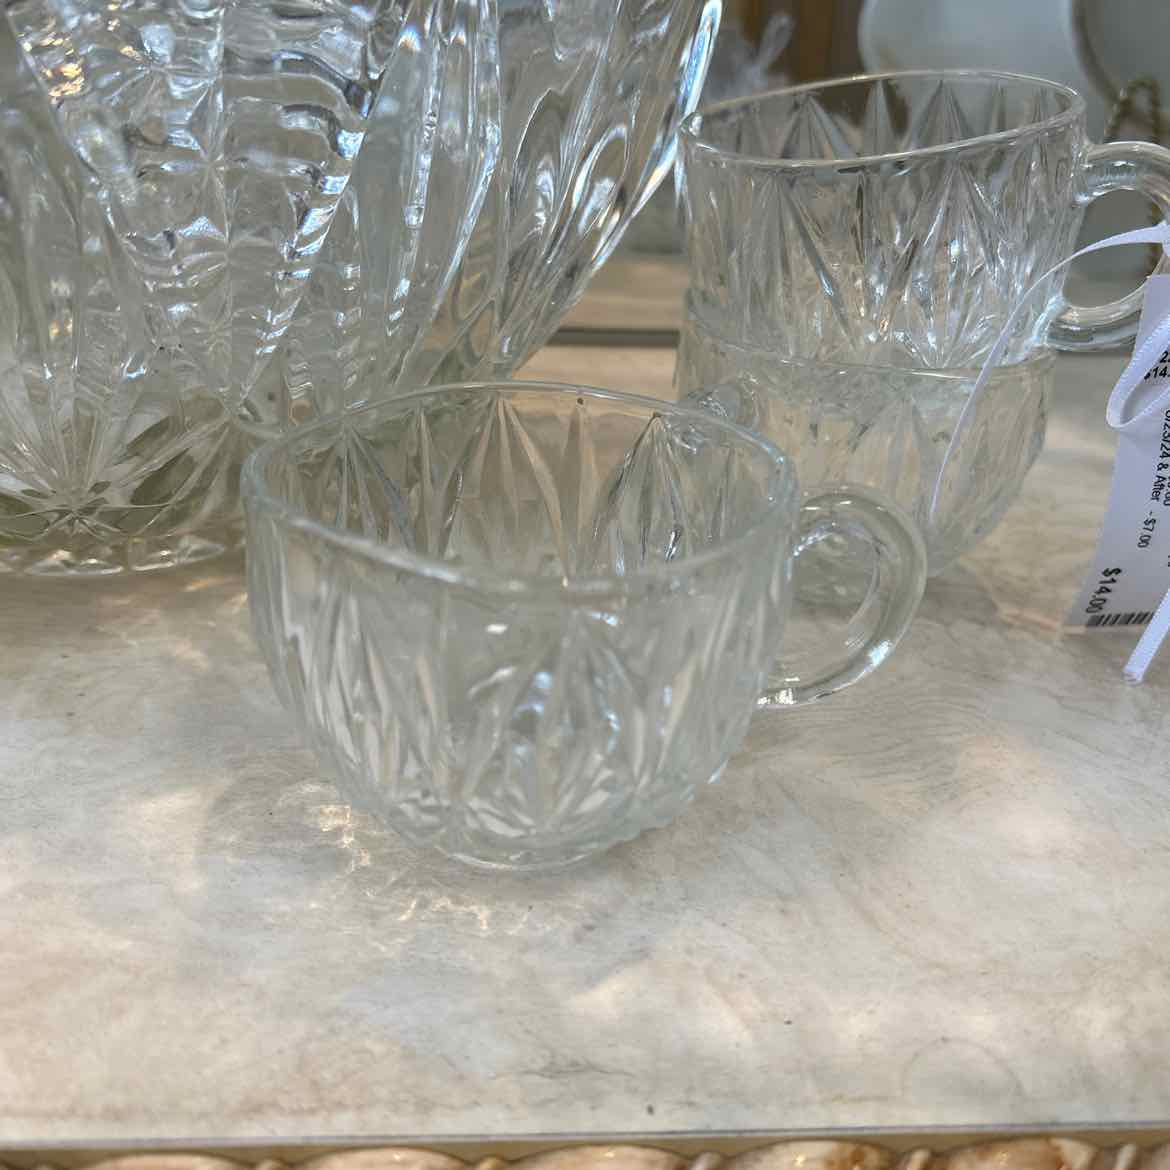 Glass Punch Bowl w/12 Cups